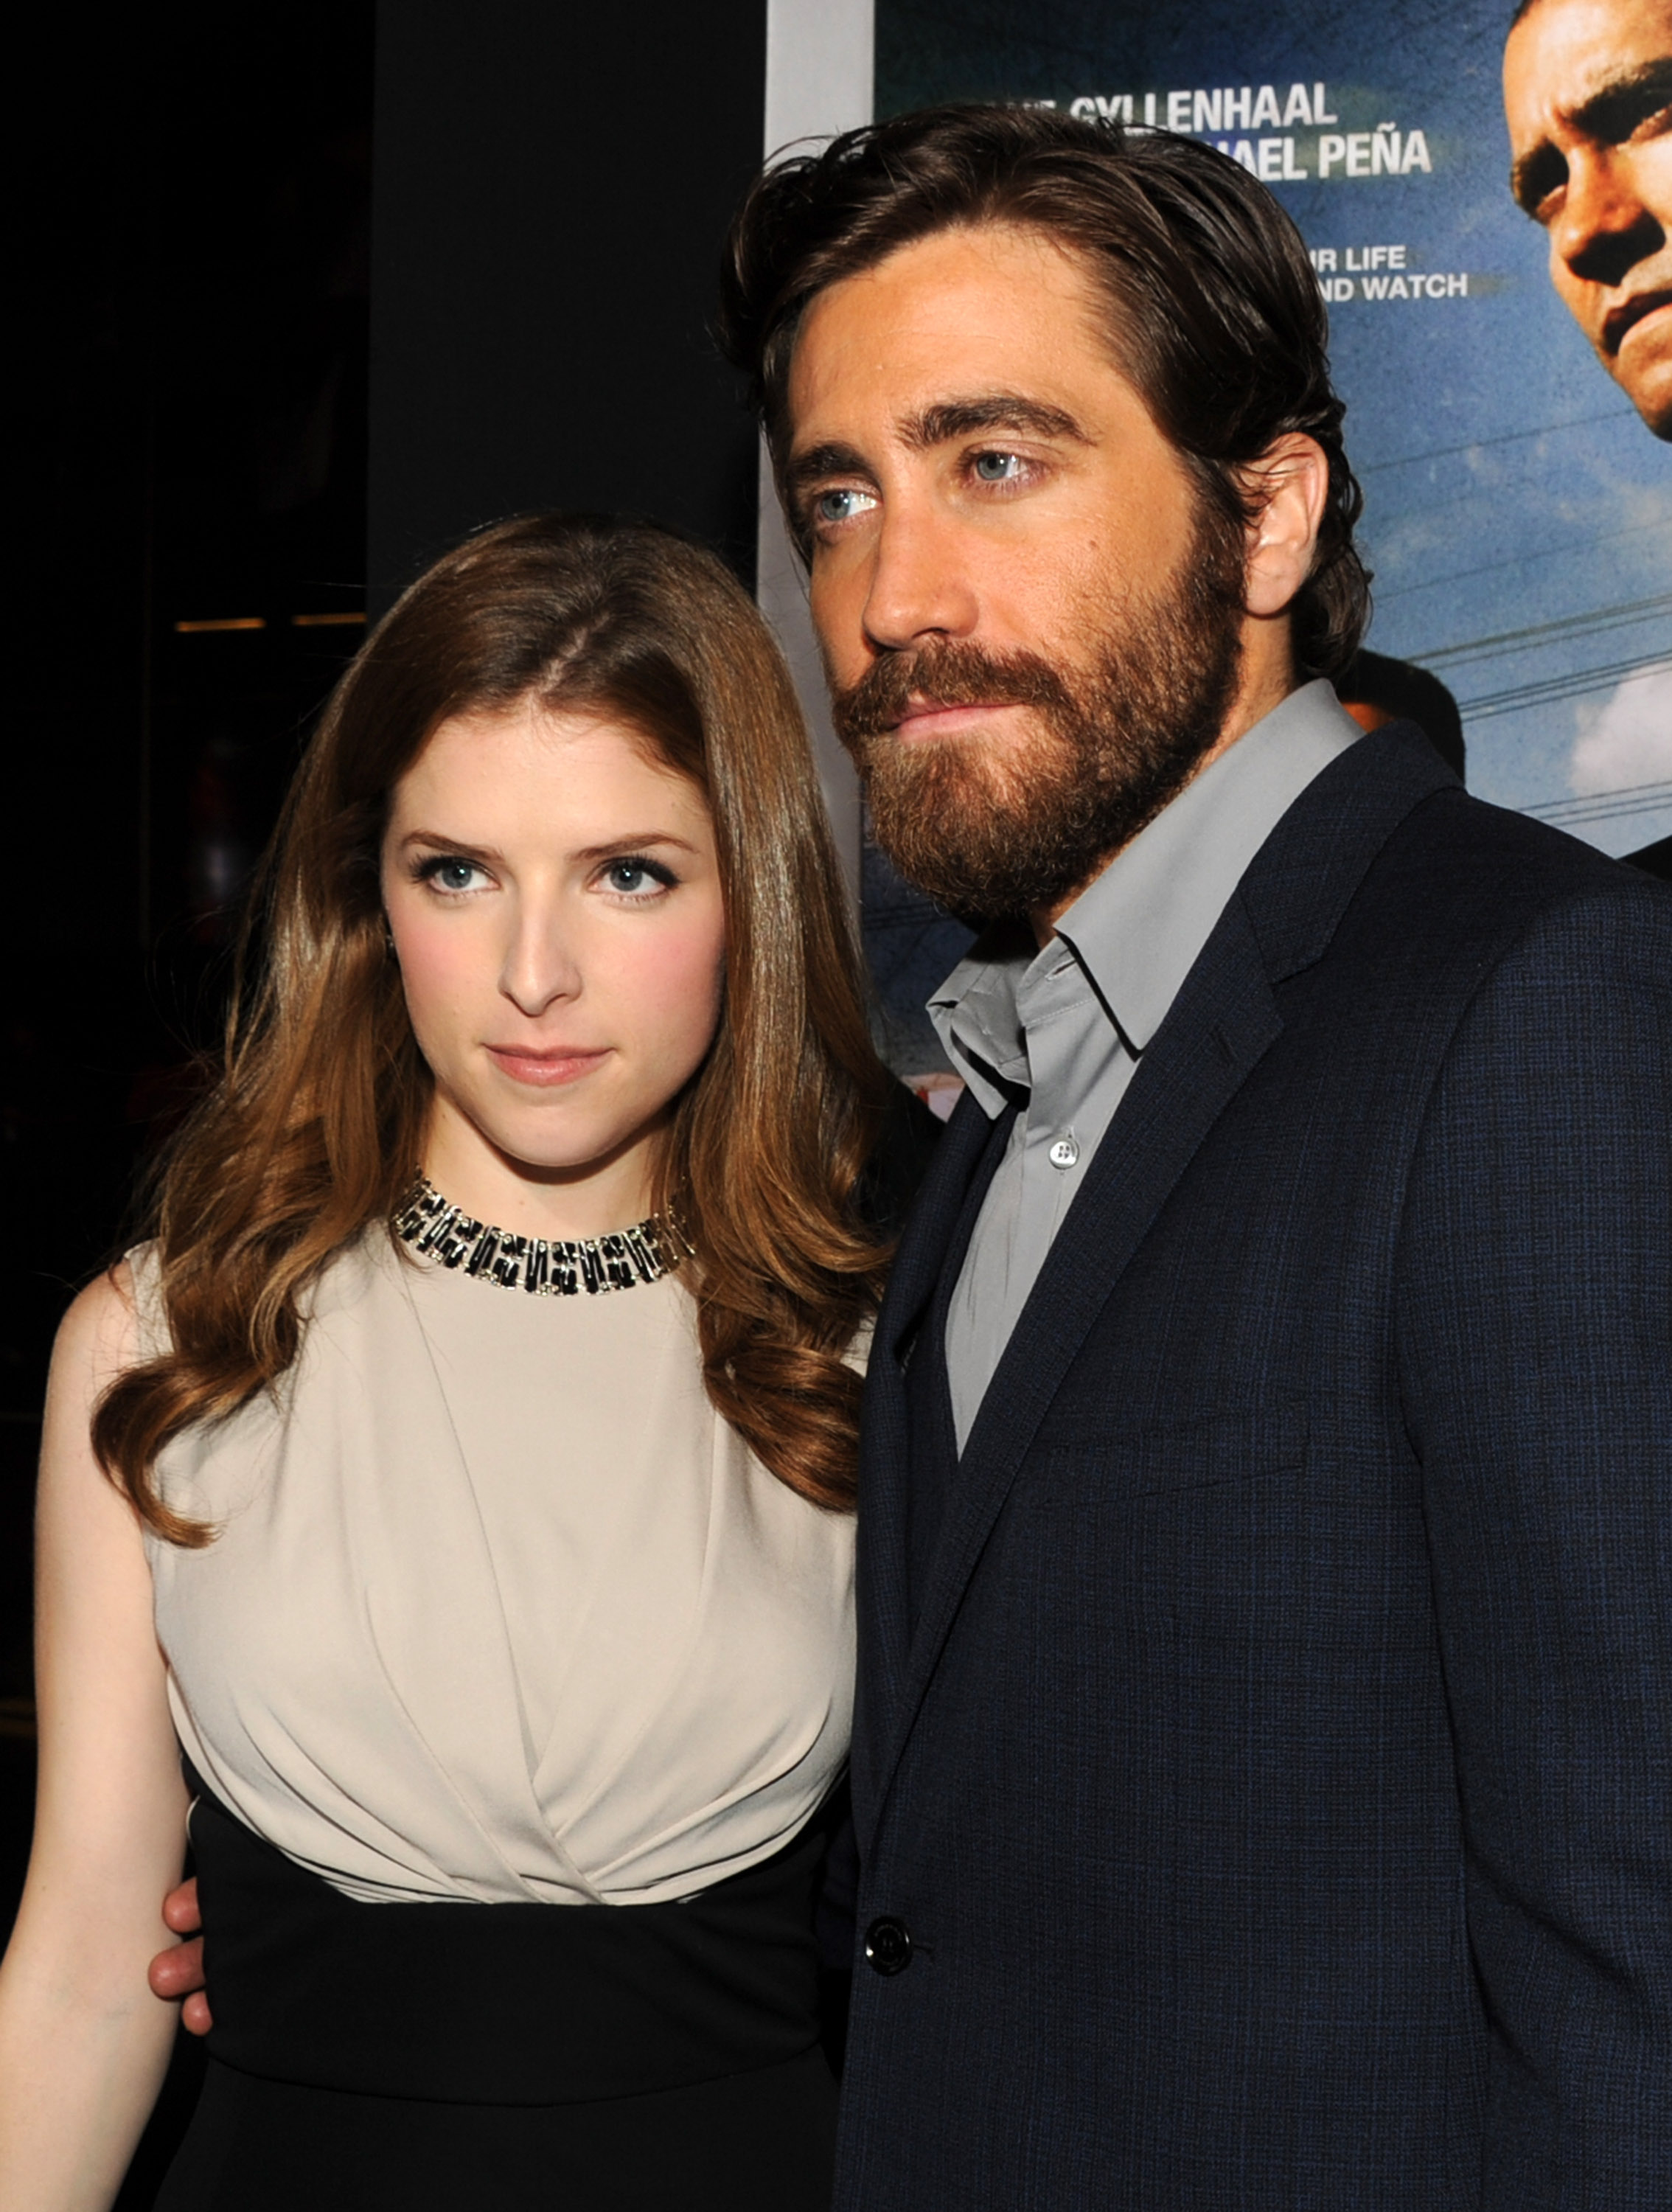 Jake Gyllenhaal and Anna Kendrick were co-stars in 2012's End of Watch